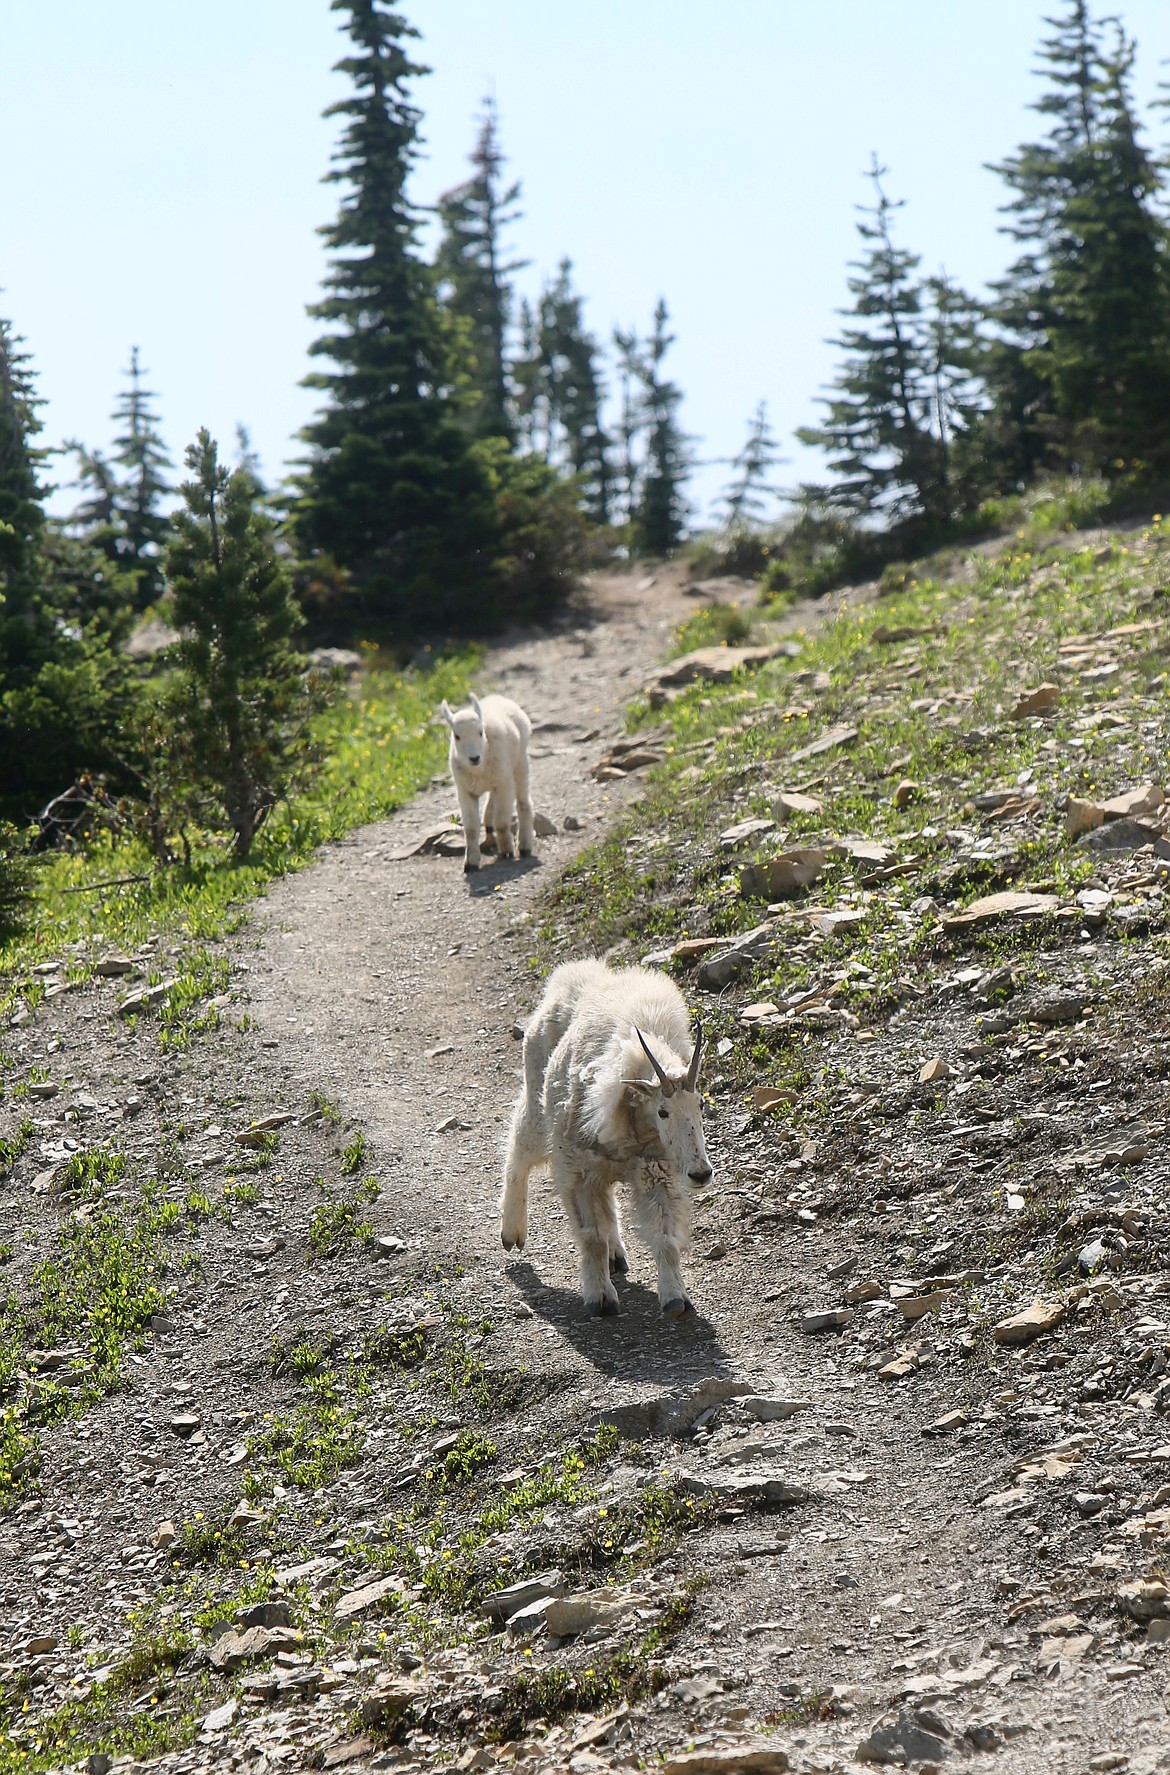 Scenes from the summit trail to Mount Aeneas last Friday, July 9.
Mackenzie Reiss/Bigfork Eagle